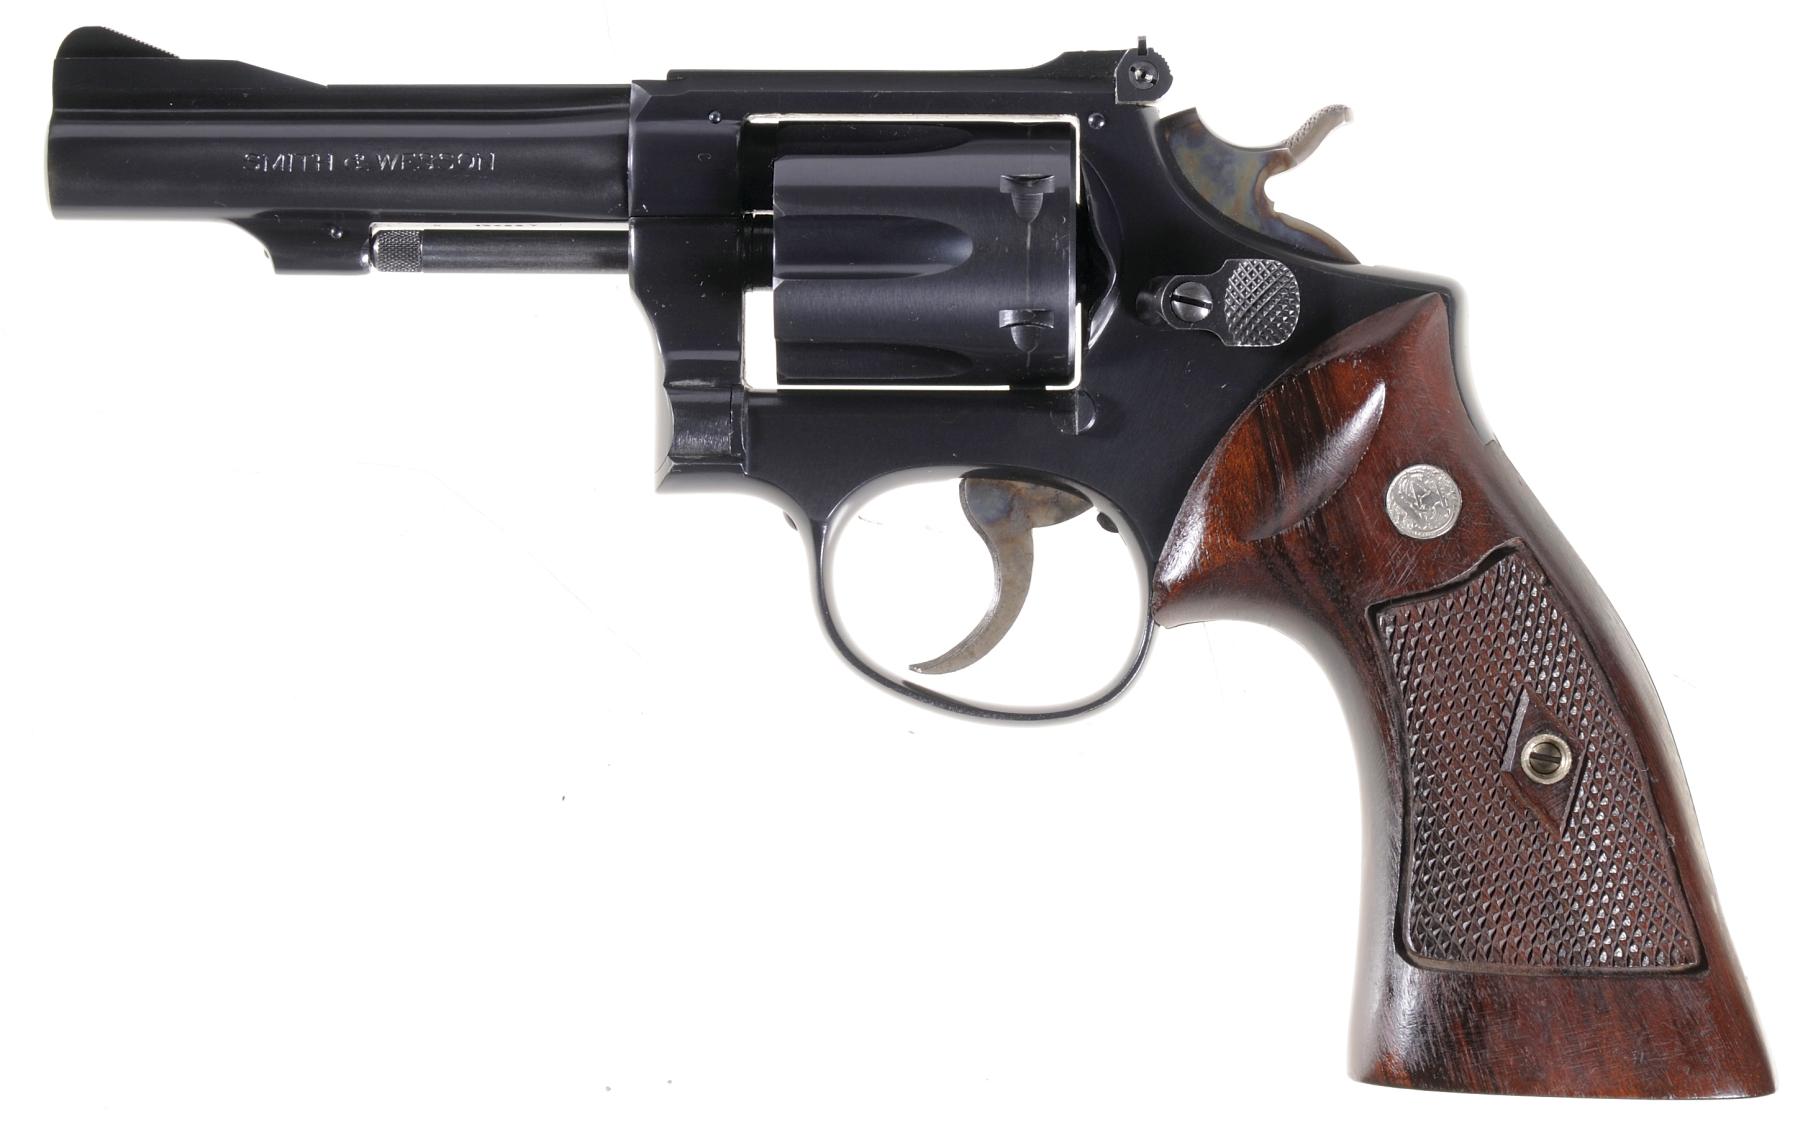 smith and wesson model 18 serial number date of manufacture